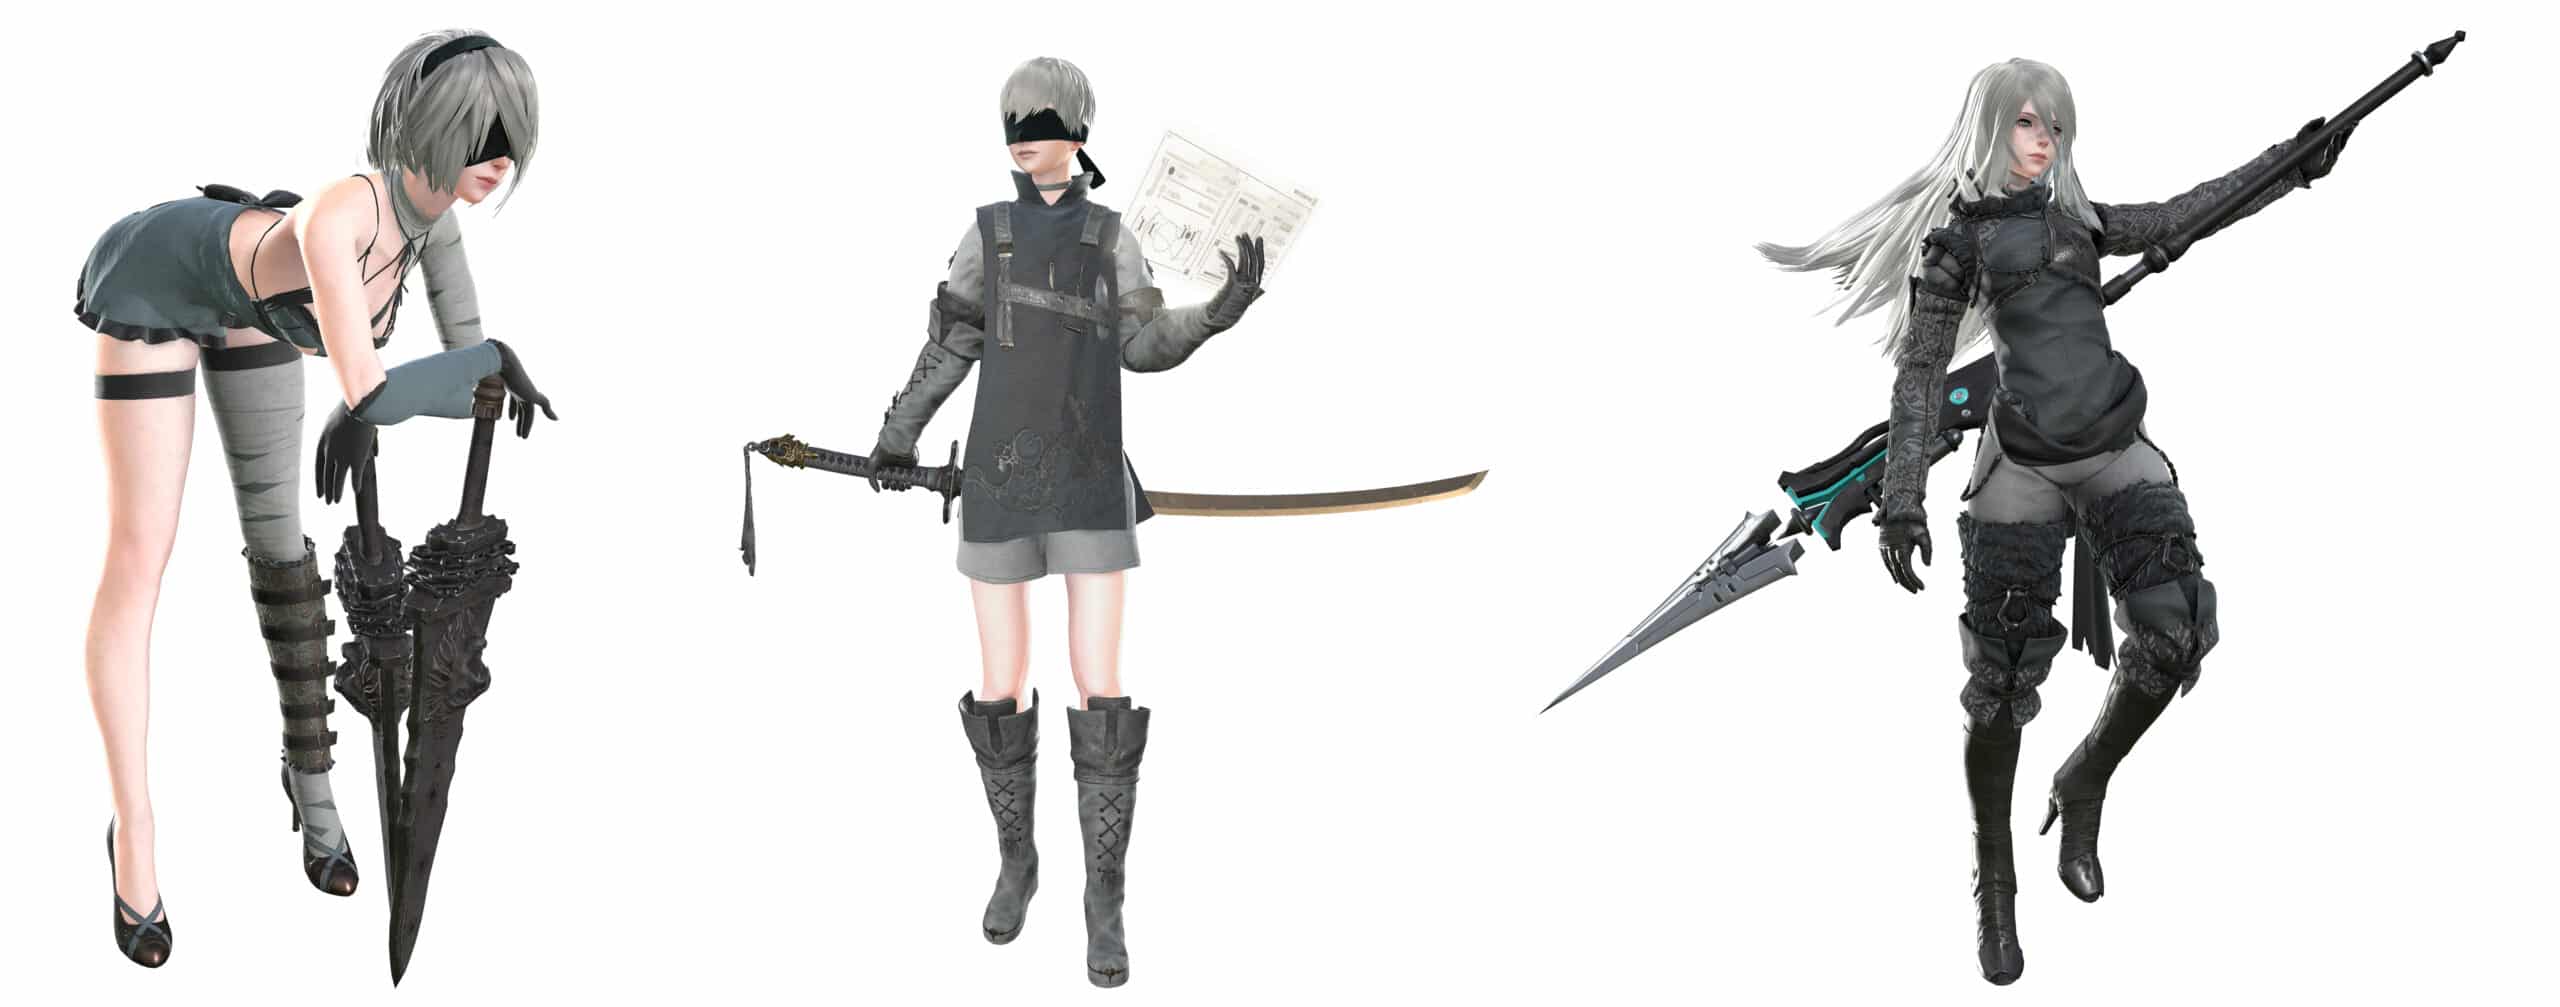 Continentaal zweer delicatesse NieR Automata DLC Costumes